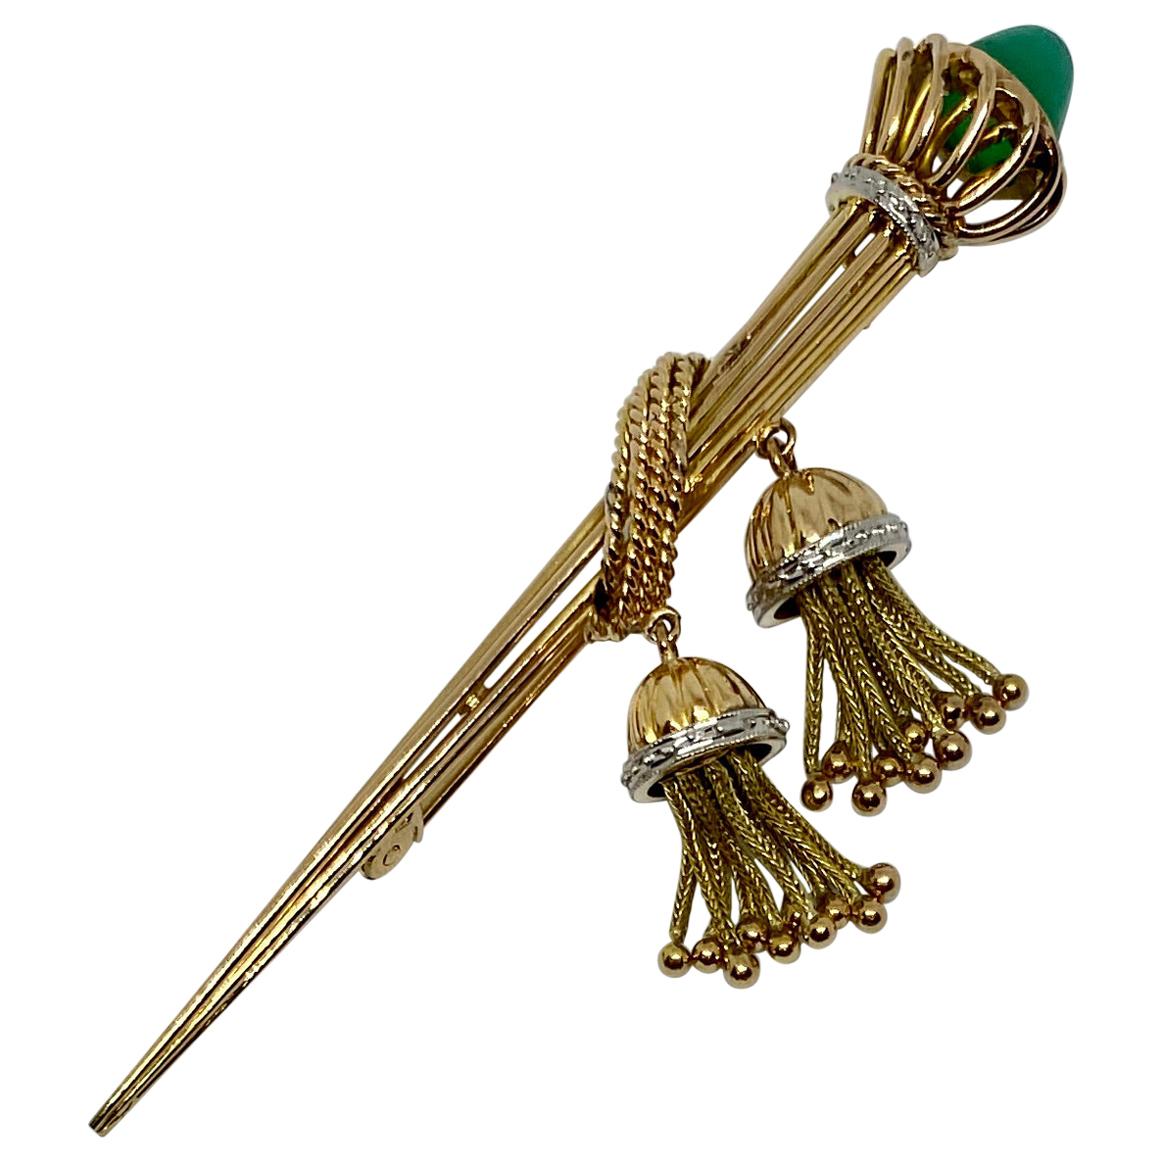 Antique "Torch" Brooch in 18K Gold with Chrysoprase "Flame" and Gold Tassels